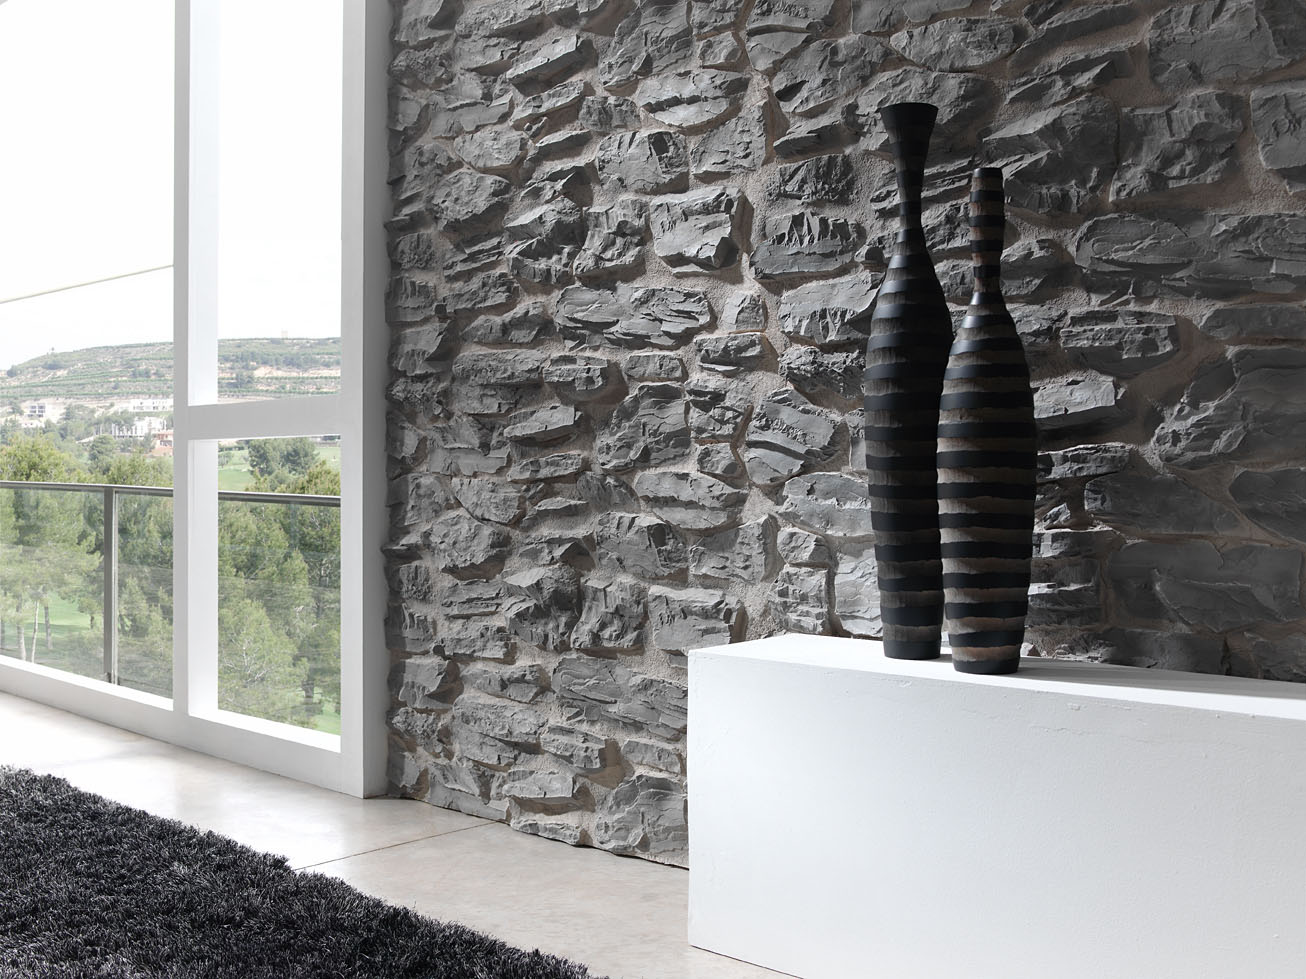 stone textured wall next to window whit white table in front of it with black bottles on the table